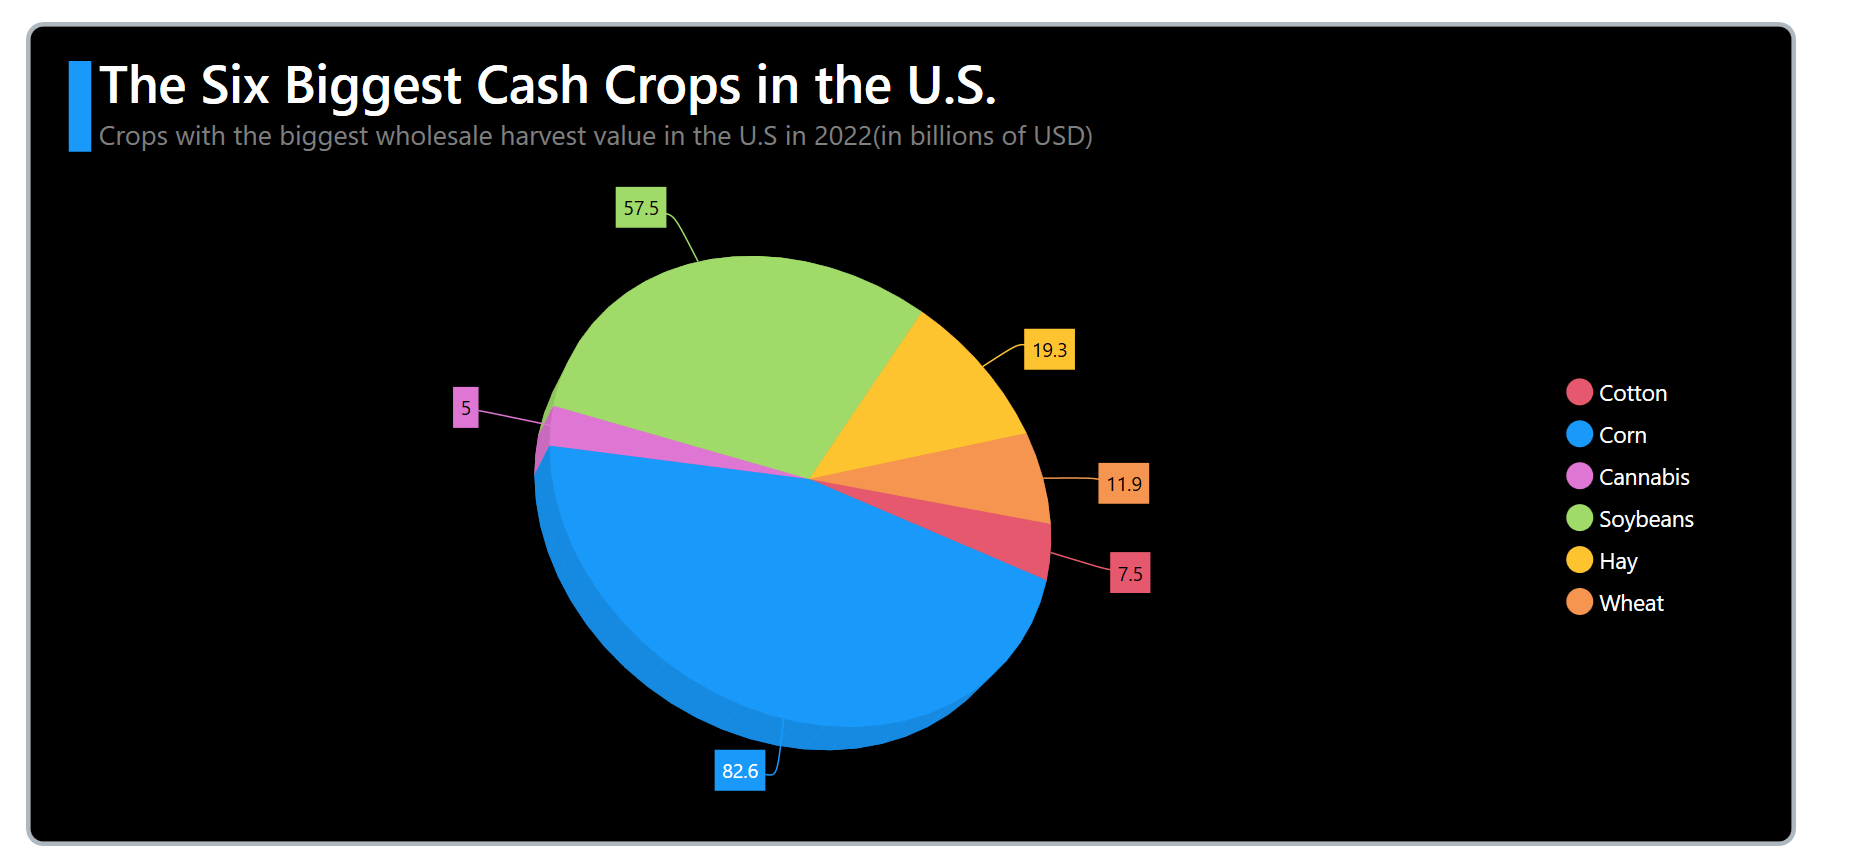 Visualizing the Biggest Cash Crops in the U.S. Using the WPF 3D Pie Chart